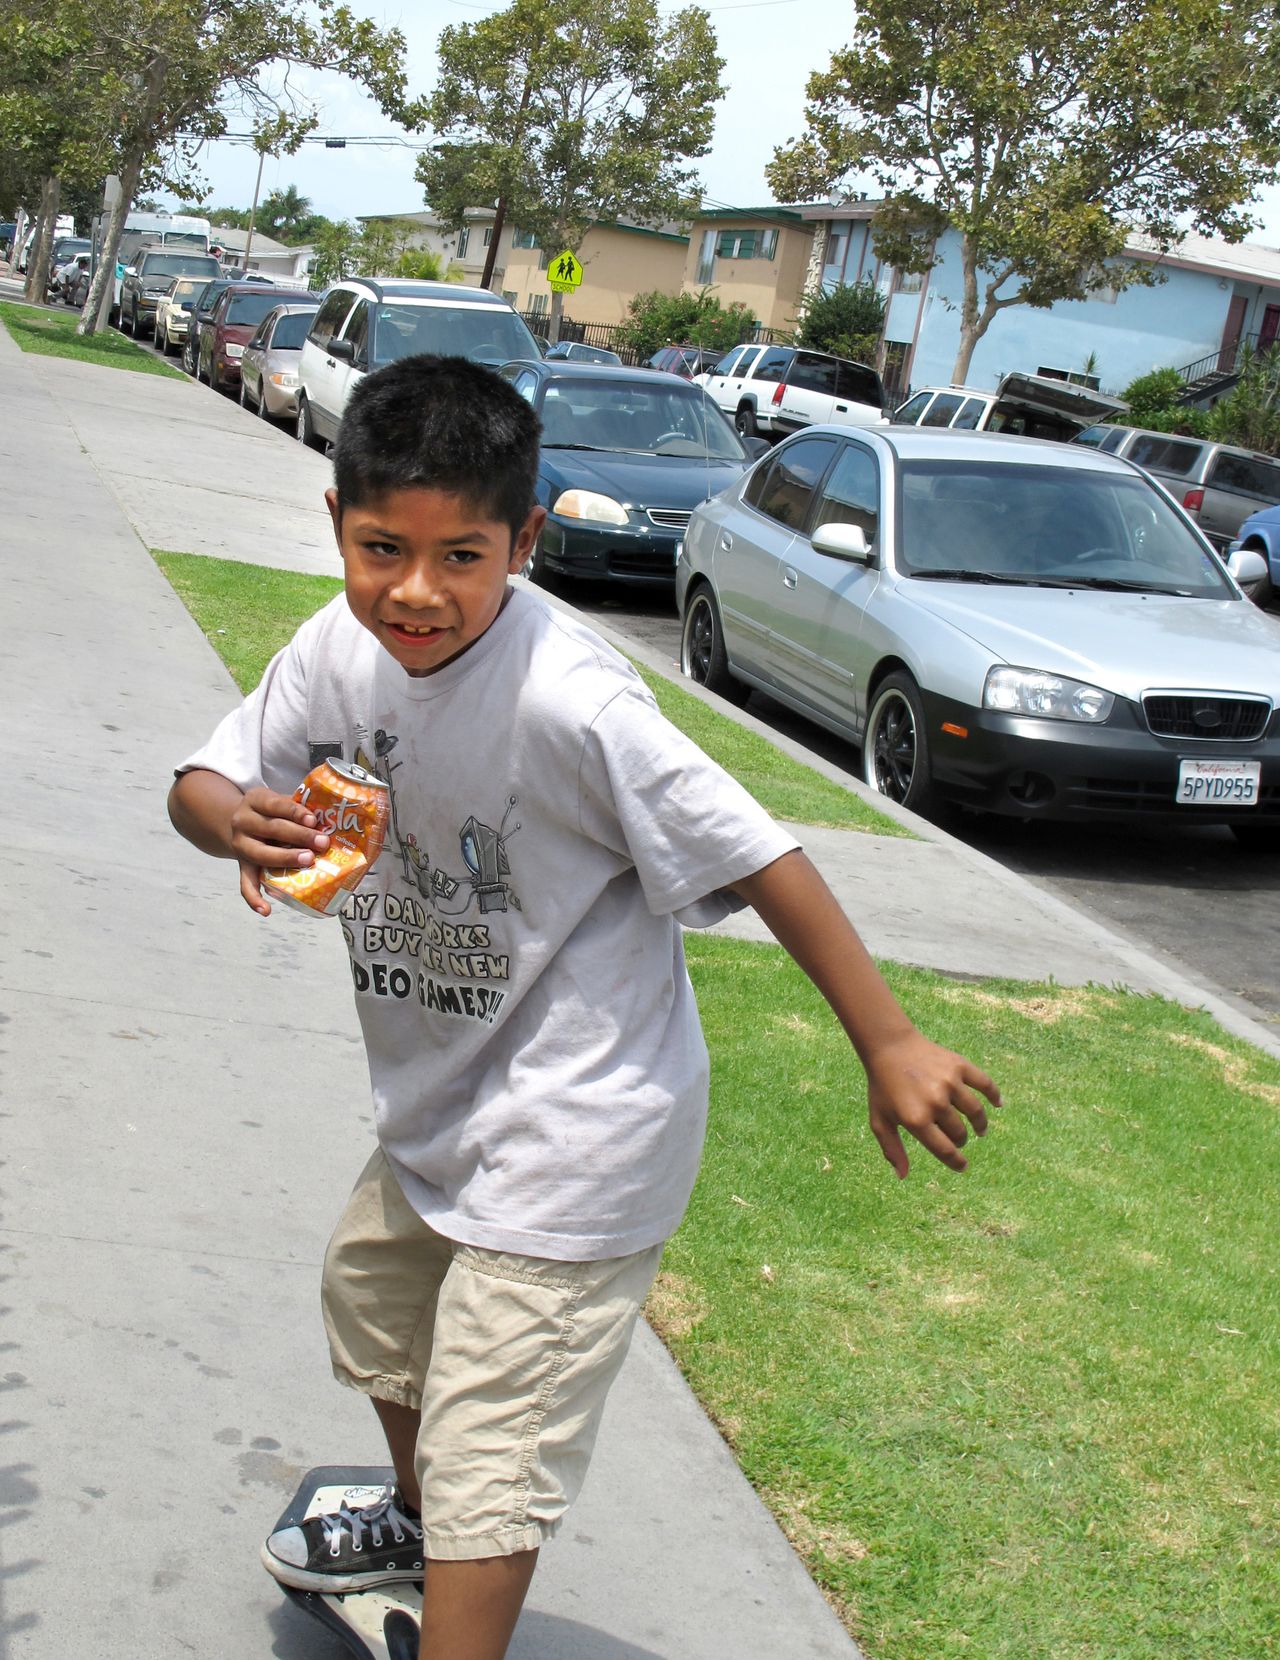 In the summer of 2014, Cesar Gaspar, 8, skateboards through his Townsend Street neighborhood in Santa Ana during a community barbecue.